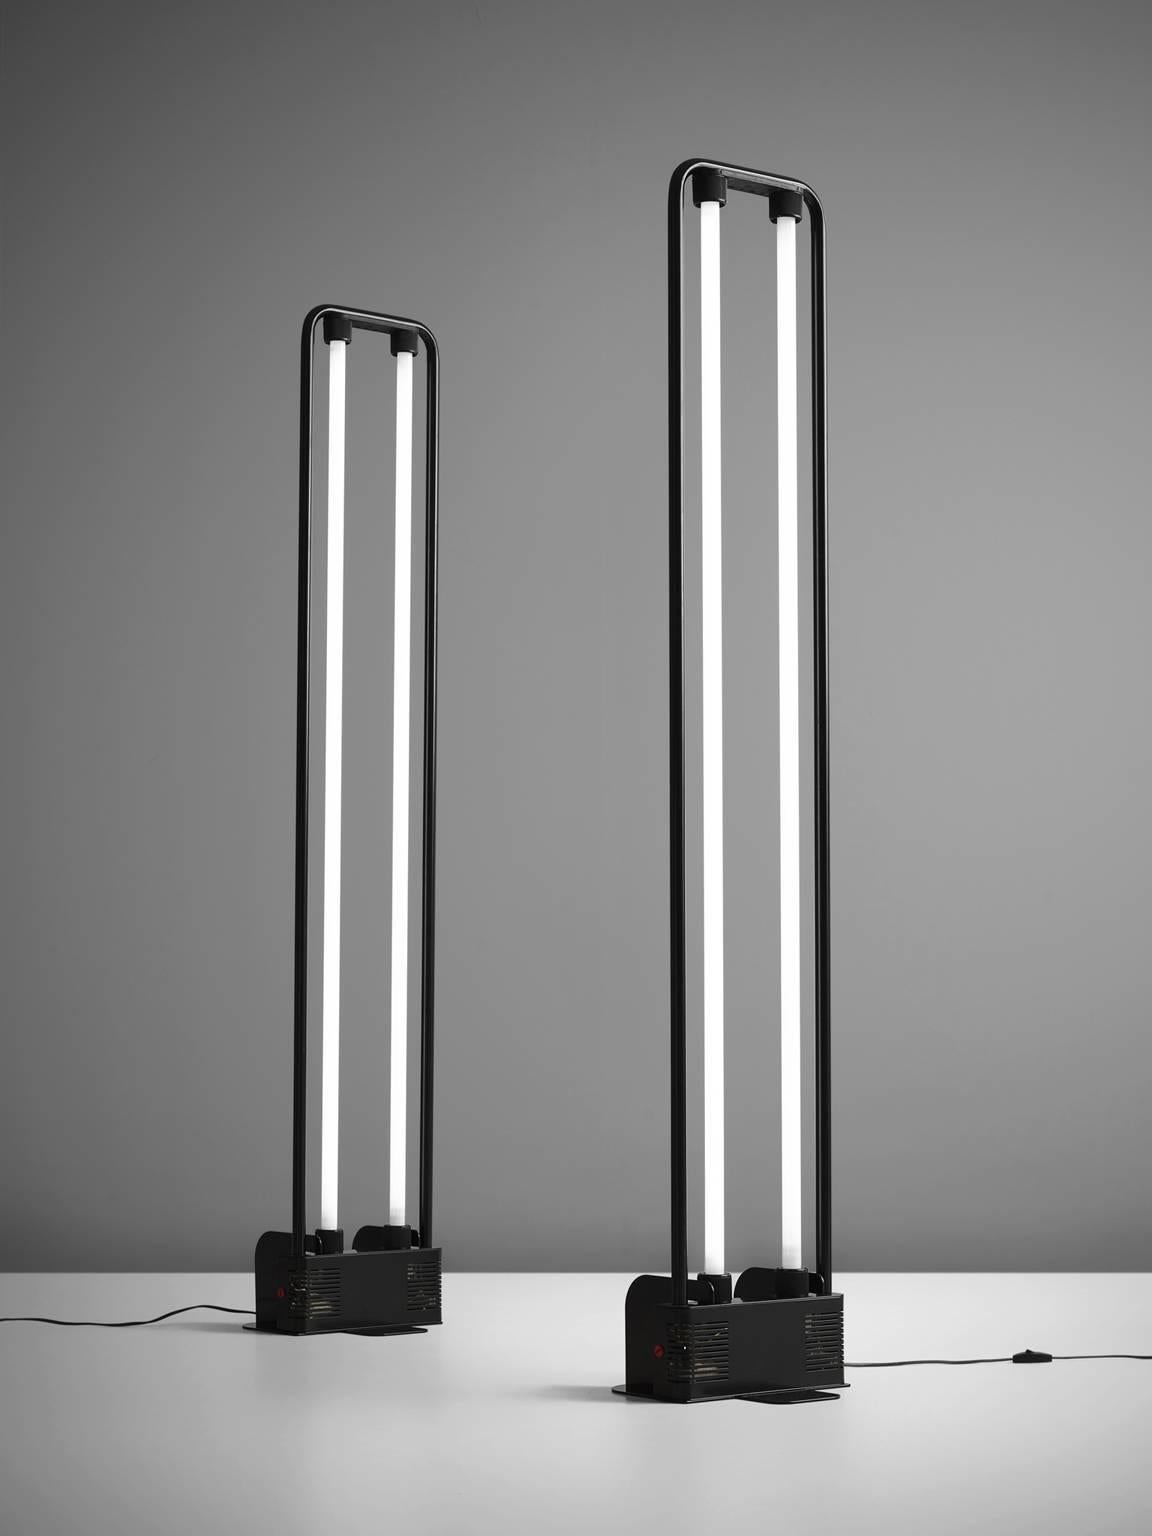 Gian Nicola Gigante for Zerbetto, pair of floor lamps, black coated metal and glass, Italy, 1980s. 

These Postmodern floor lamps are designed by Italian designer Gian Nicola Gigante. Gigante is known for his fluorescent floor lamps. These lights